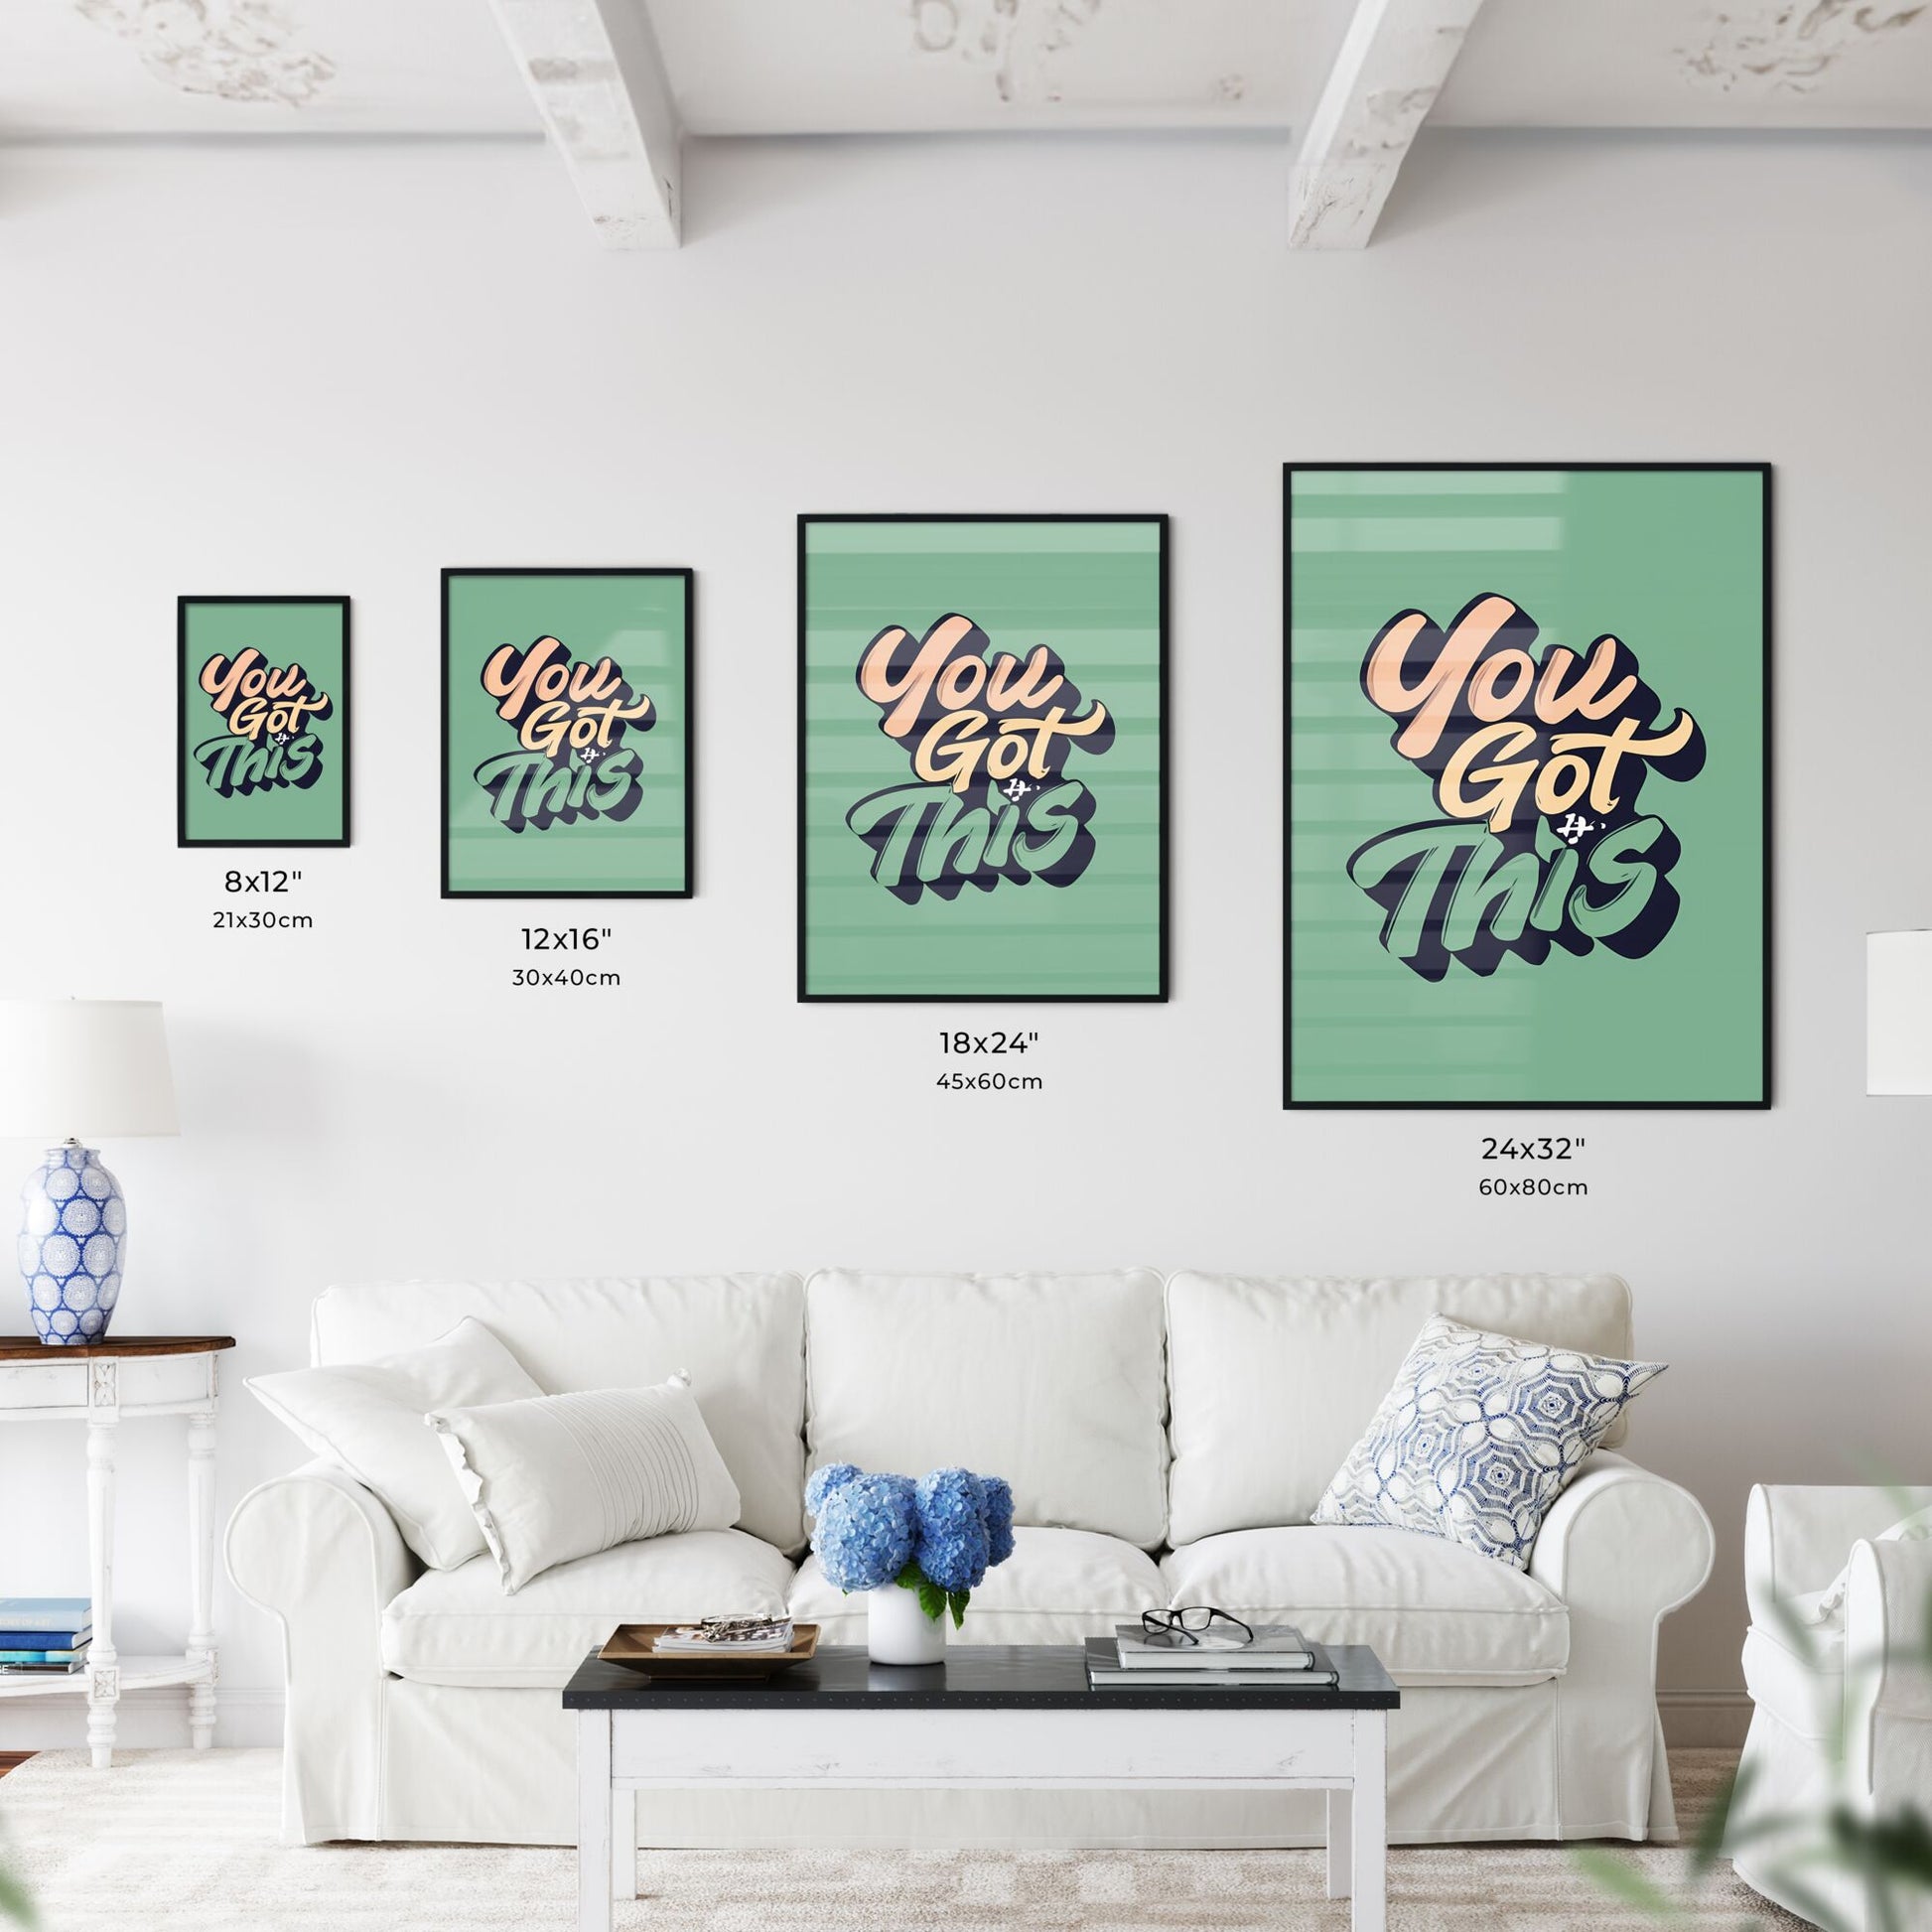 You Got This - A Green Background With Words Art Print Default Title